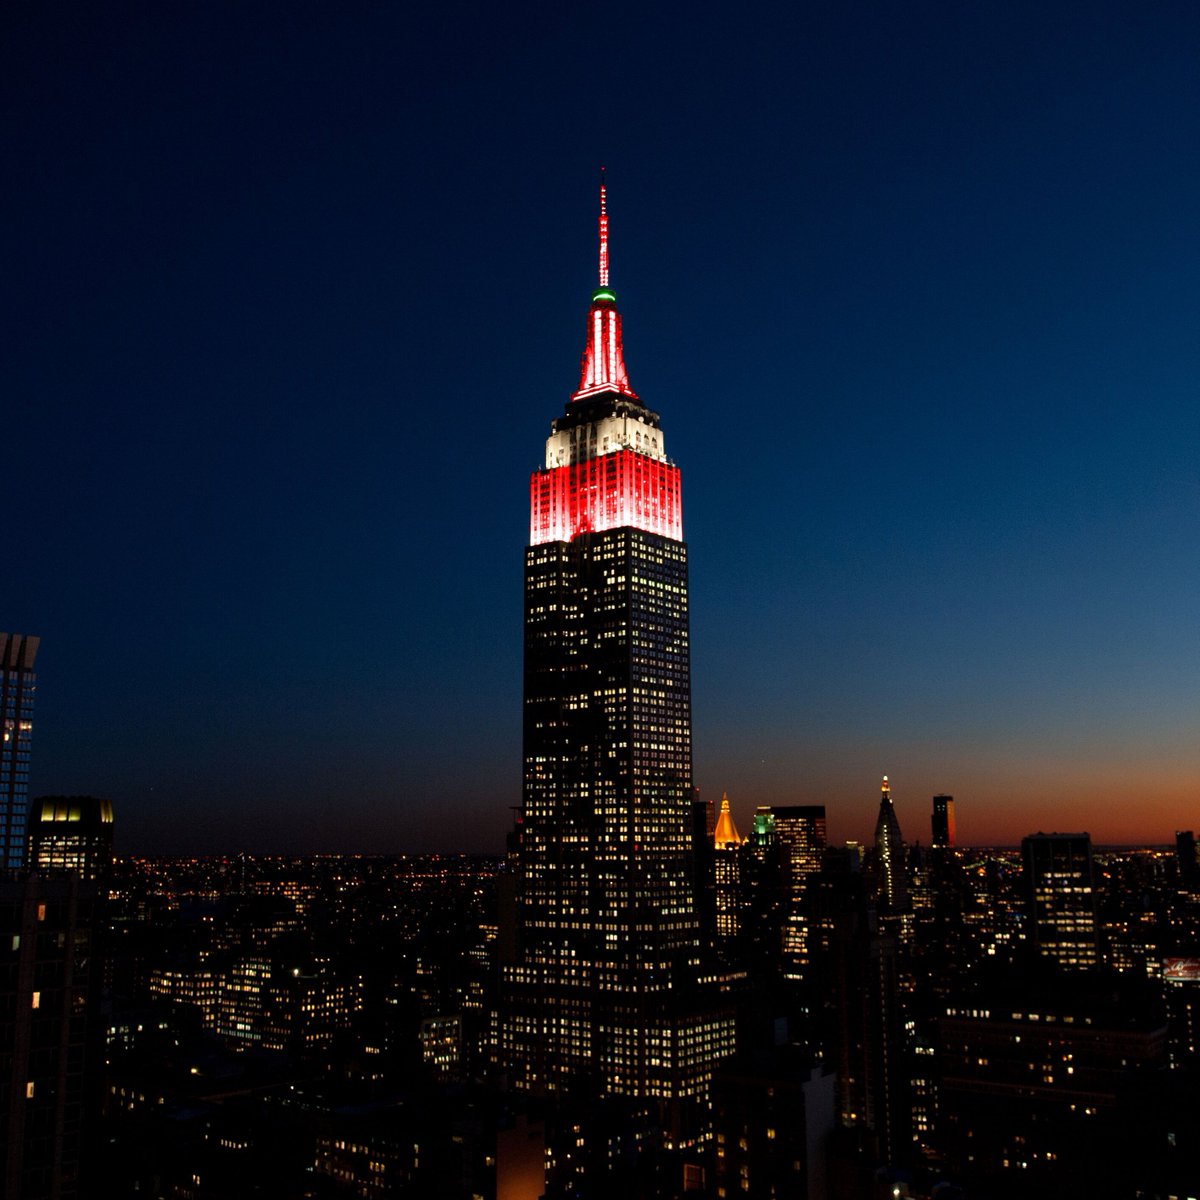 Lighting tonight in partnership with Asociacion Gilberto AC in celebration of the release of @PepeAguilar's new album 

Text CONNECT to 274-16 to get alerts on our Lights! 

 Watch tonight's lighting here: esbo.nyc/xm5